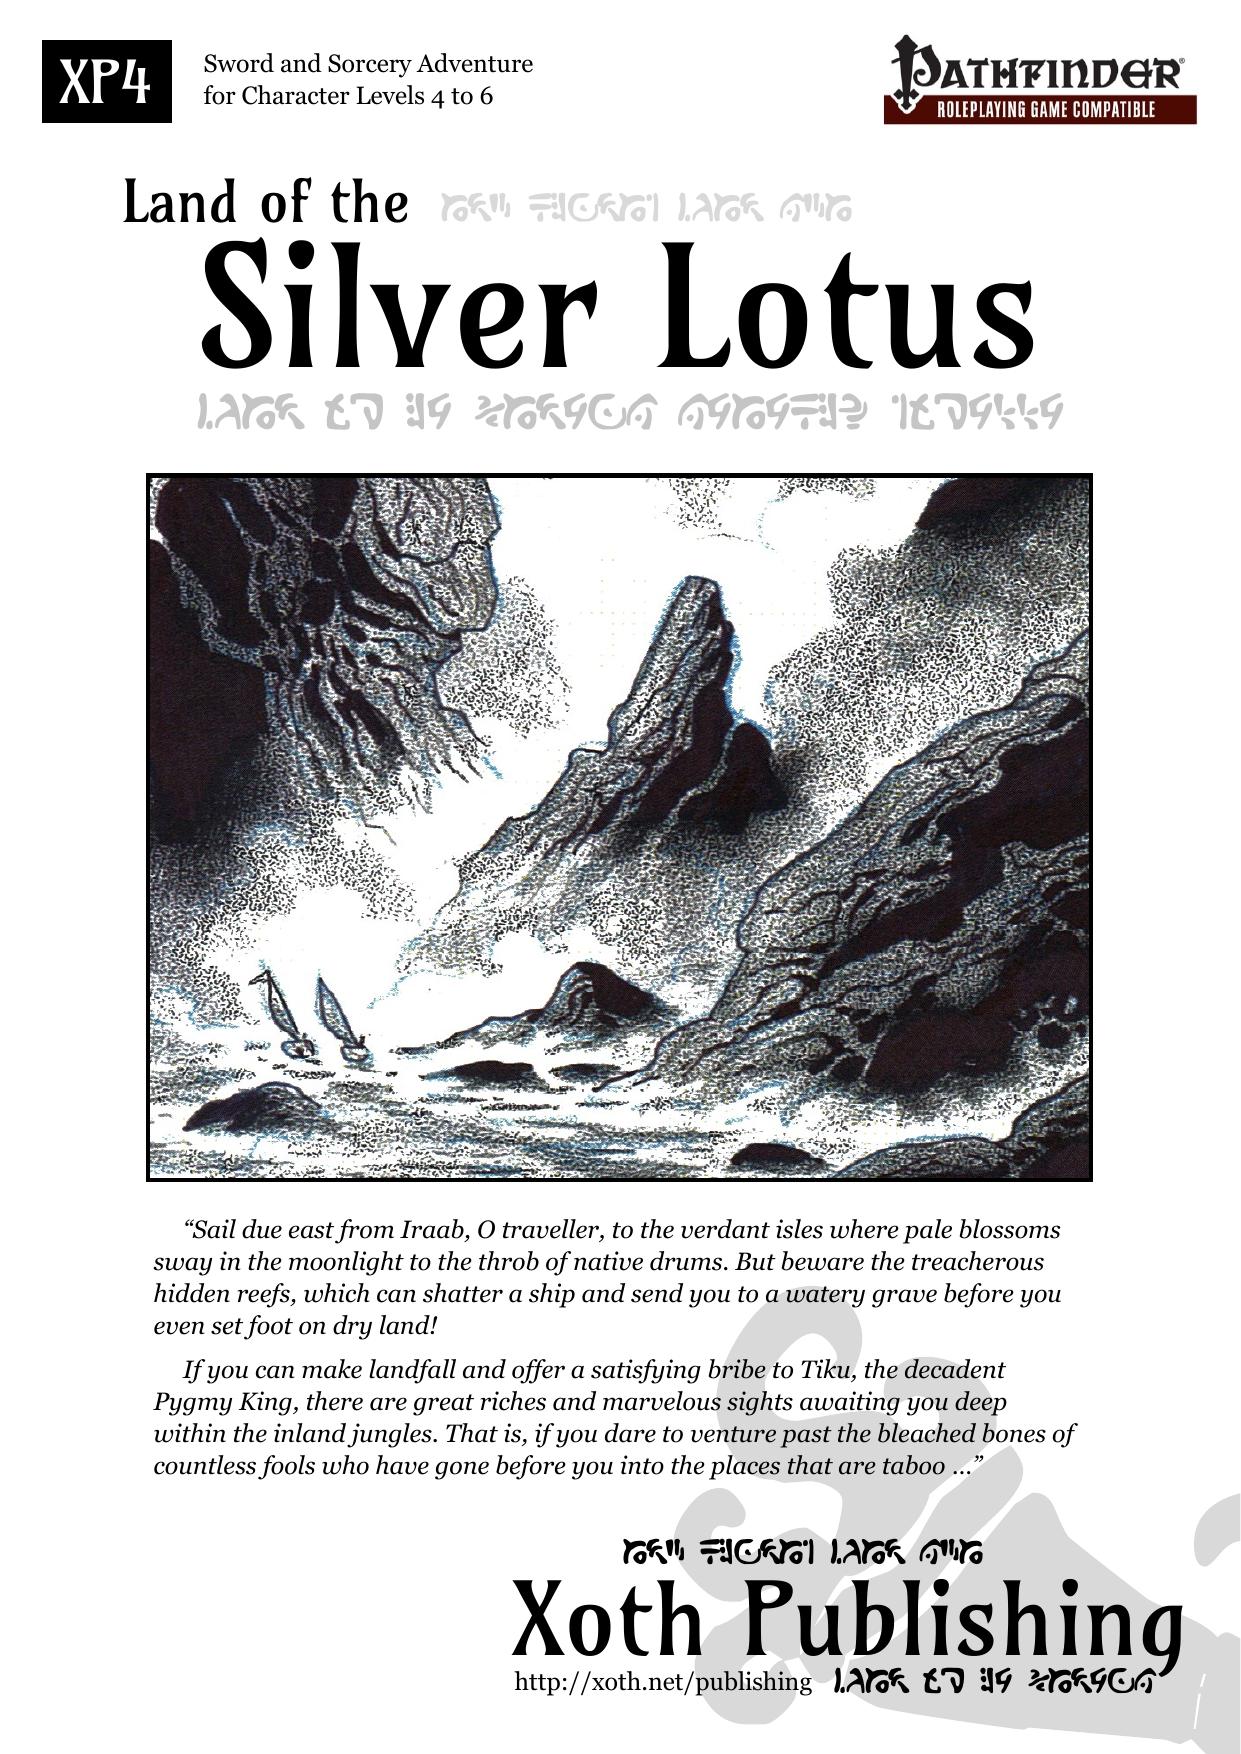 XP4 Land of the Silver Lotus (PF)